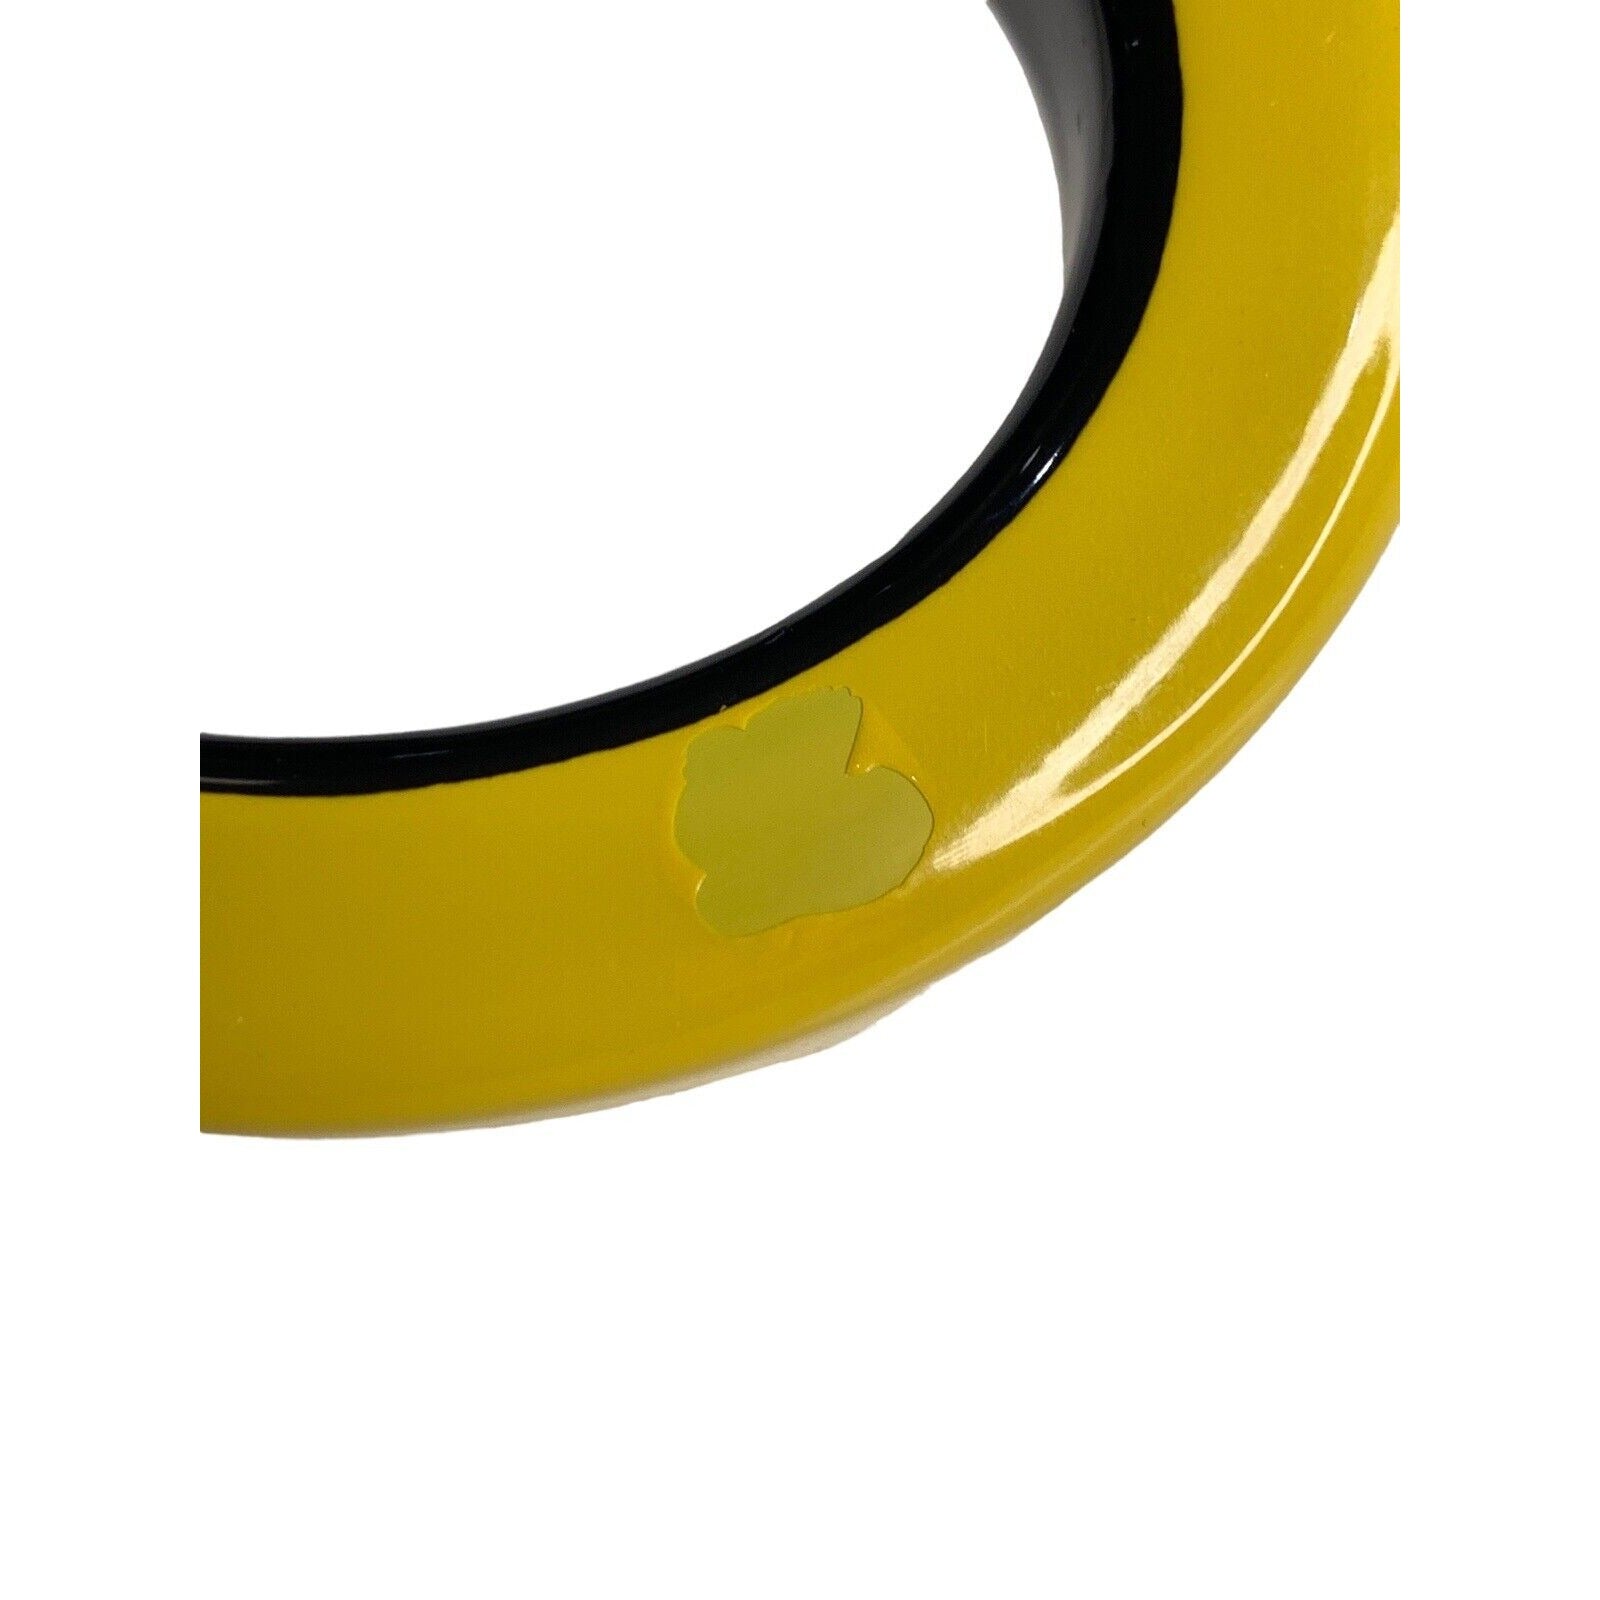 Display Of Missing Paint On Yellow Lacquer Bangle